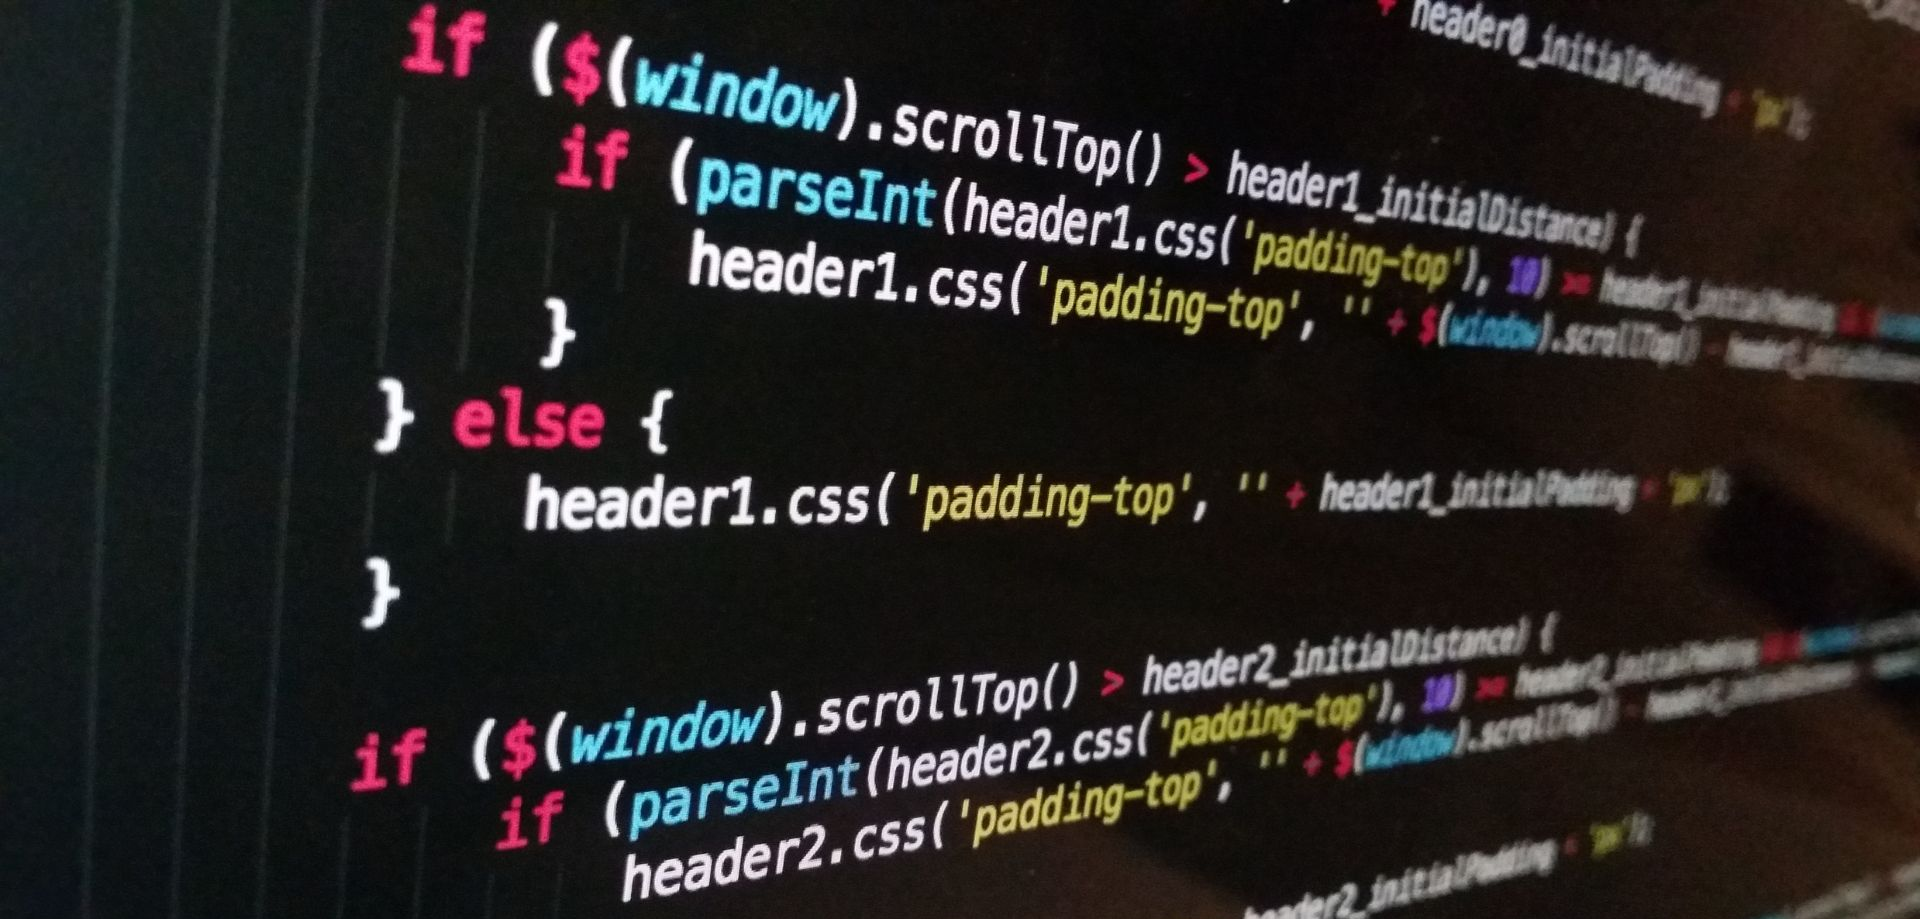 Reading code is important skill that developers often ignore 